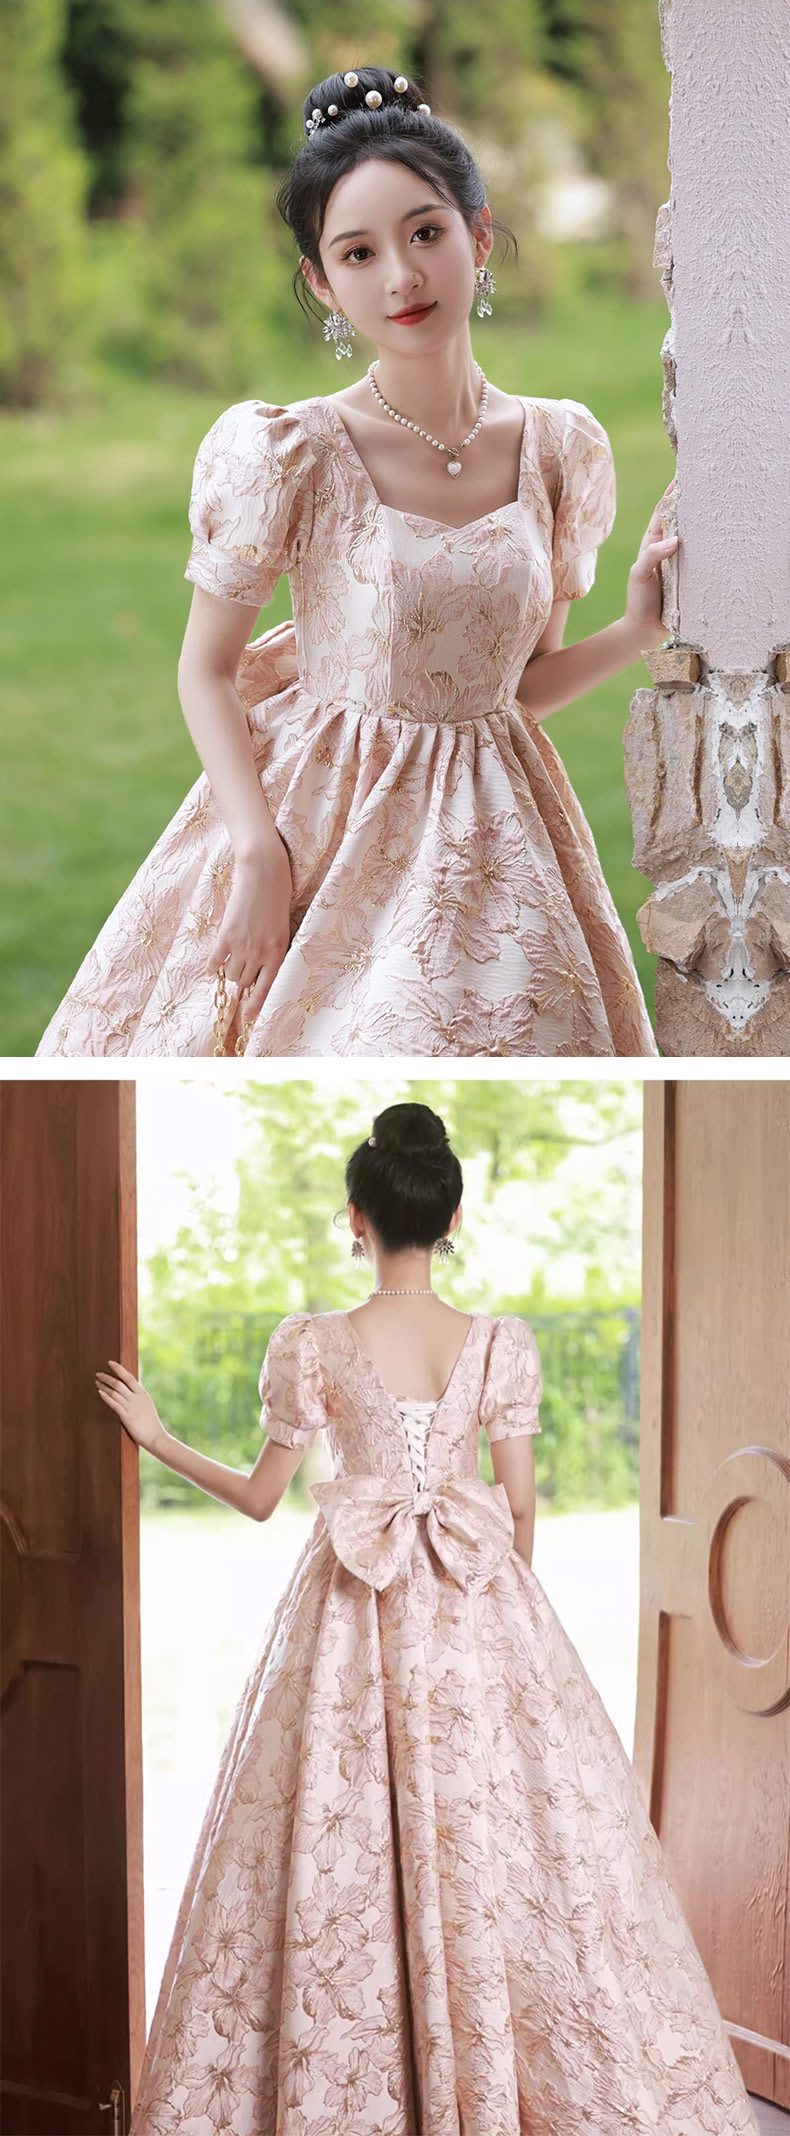 A-Line-Sweet-Pink-Floral-Jacquard-Plus-Size-Formal-Prom-Party-Dress14